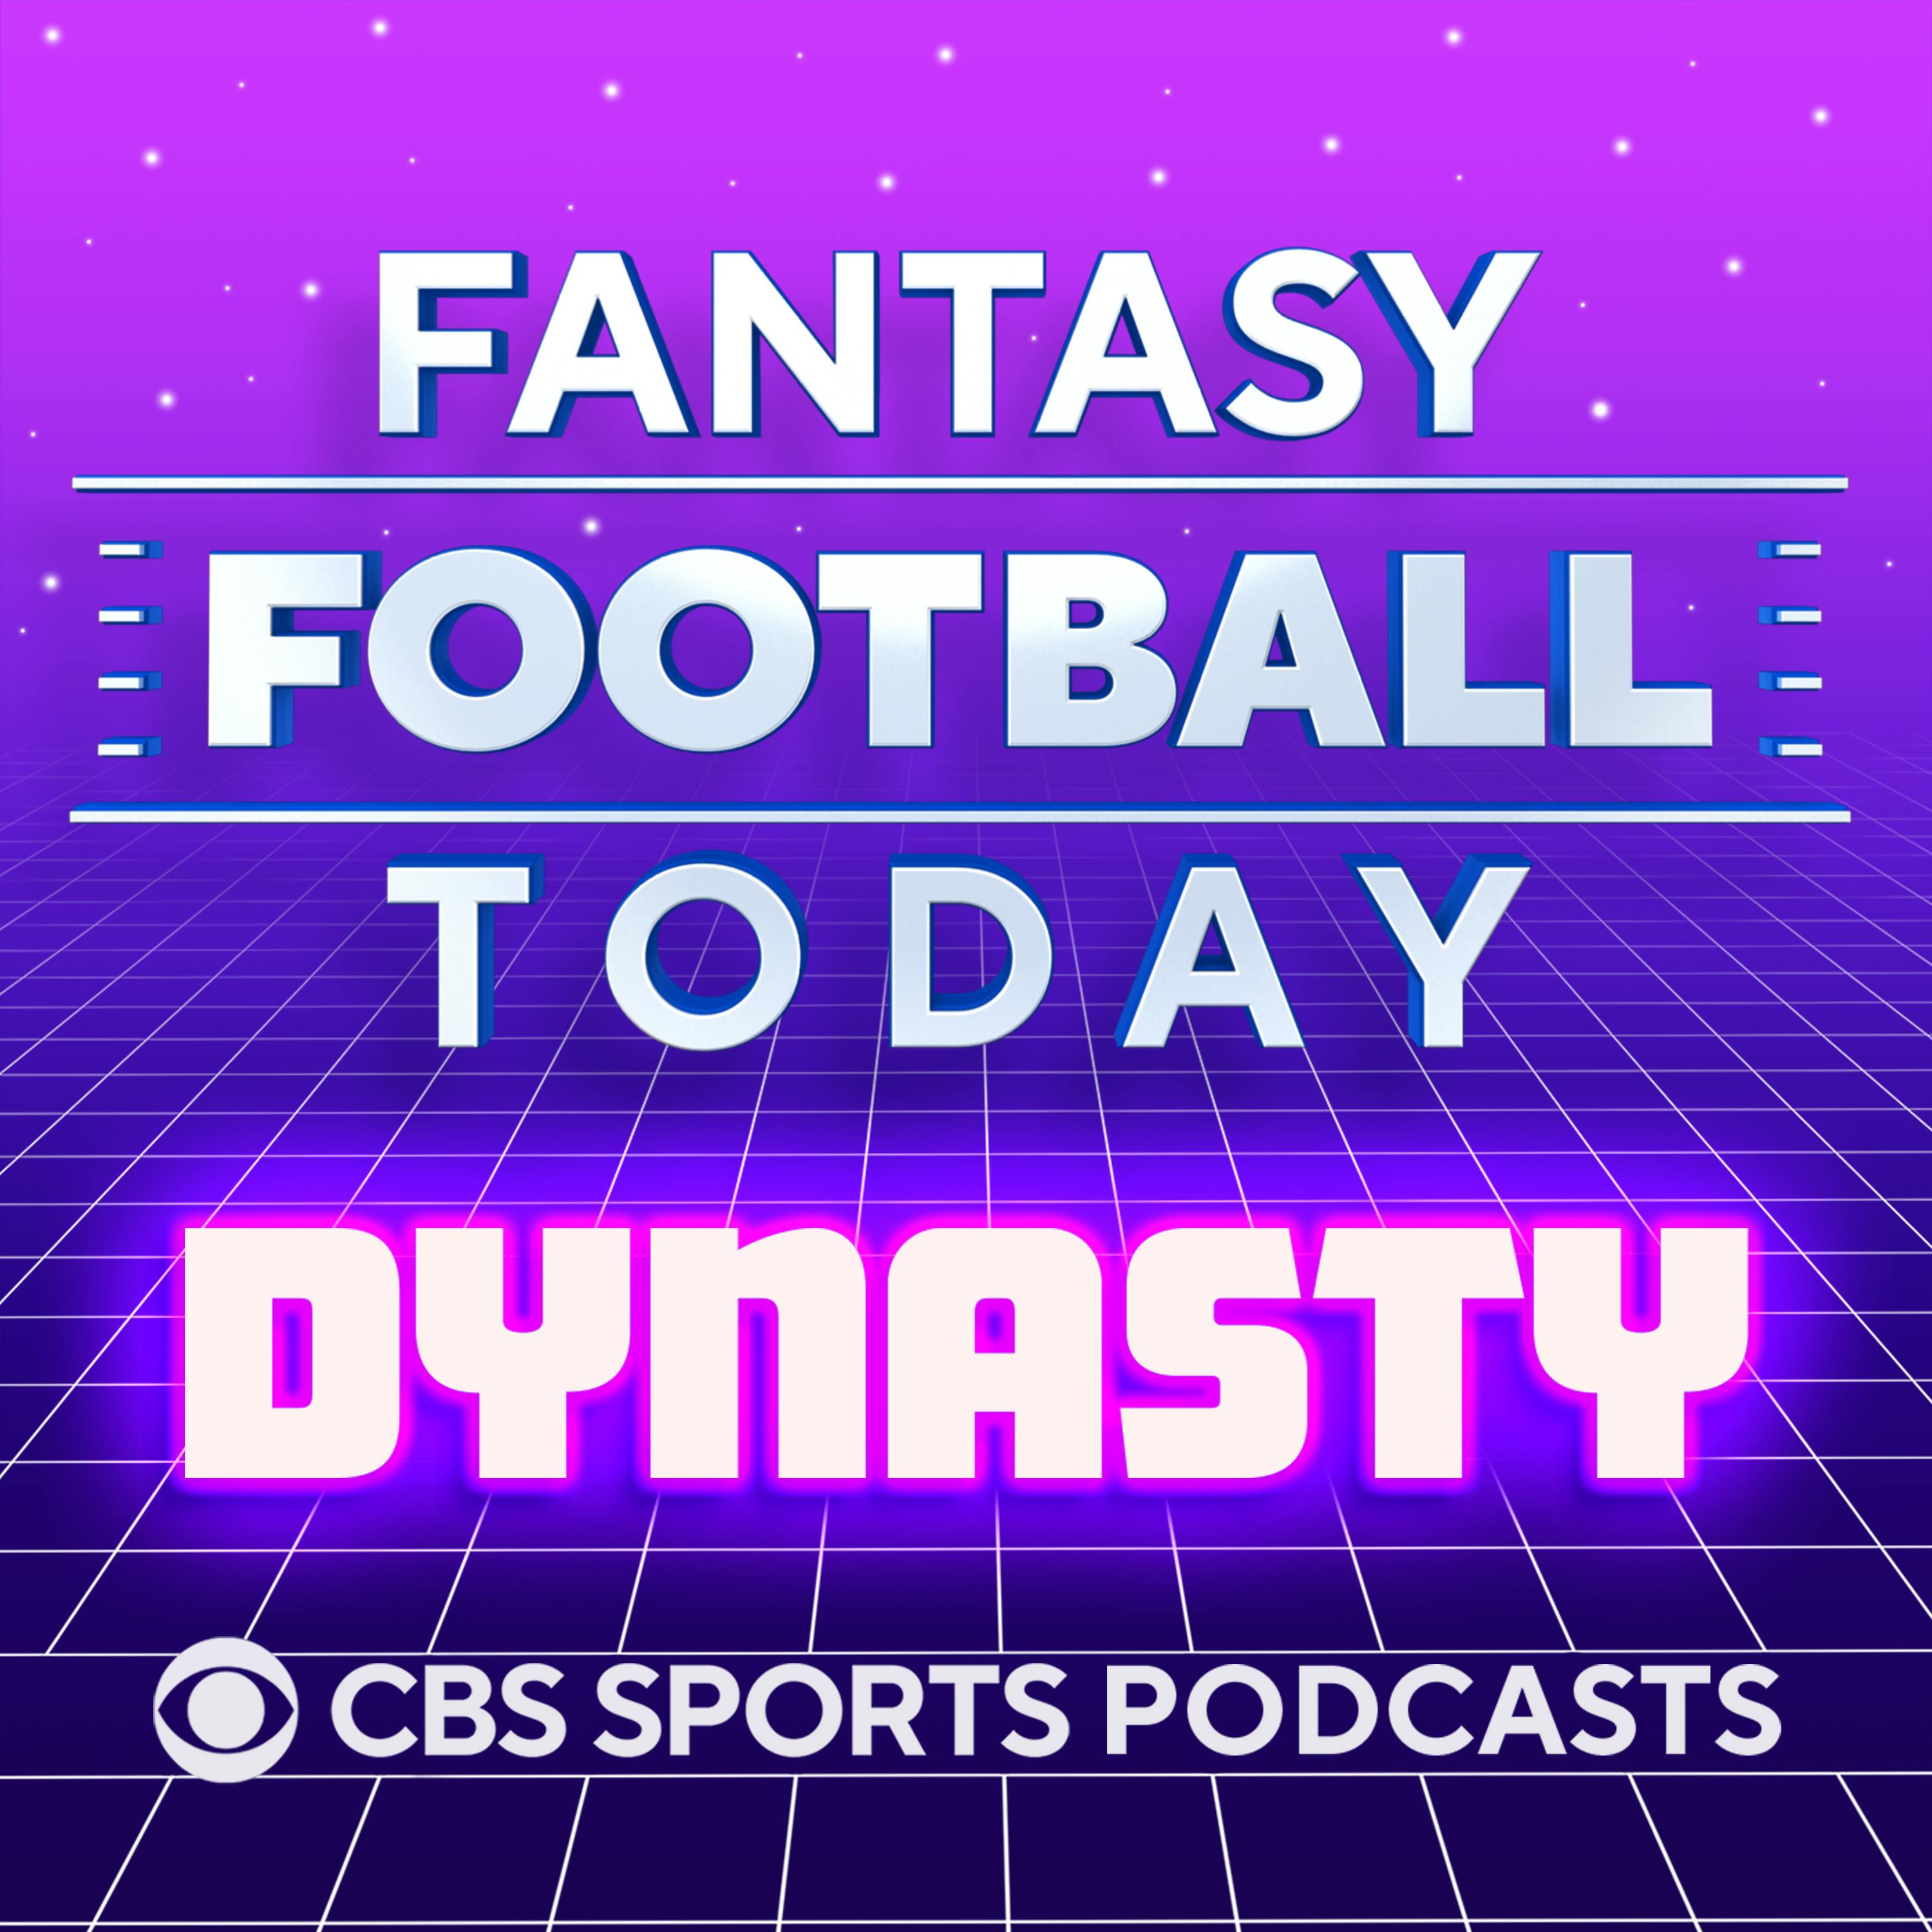 FFT Dynasty - Maximizing Return On Investment: Rookie Trade Value & Strategy! (05/14 Dynasty Fantasy Football Podcast)